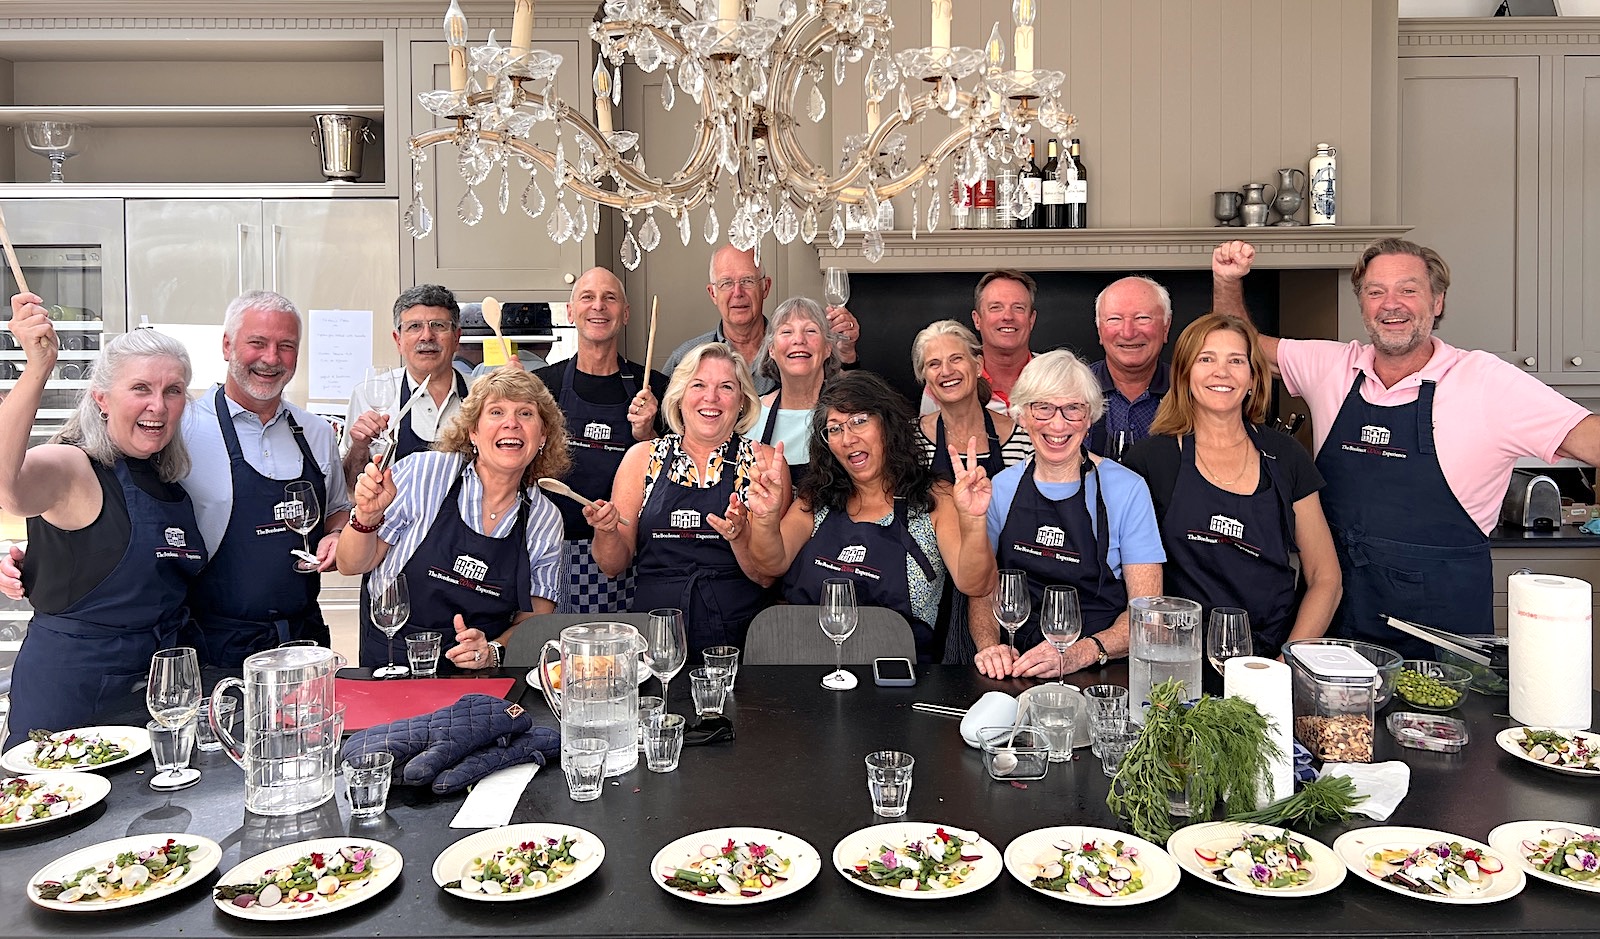 The cooking class is an incredible wine-soaked team-building experience and it remains one of the unbeatable highlights on our tours.